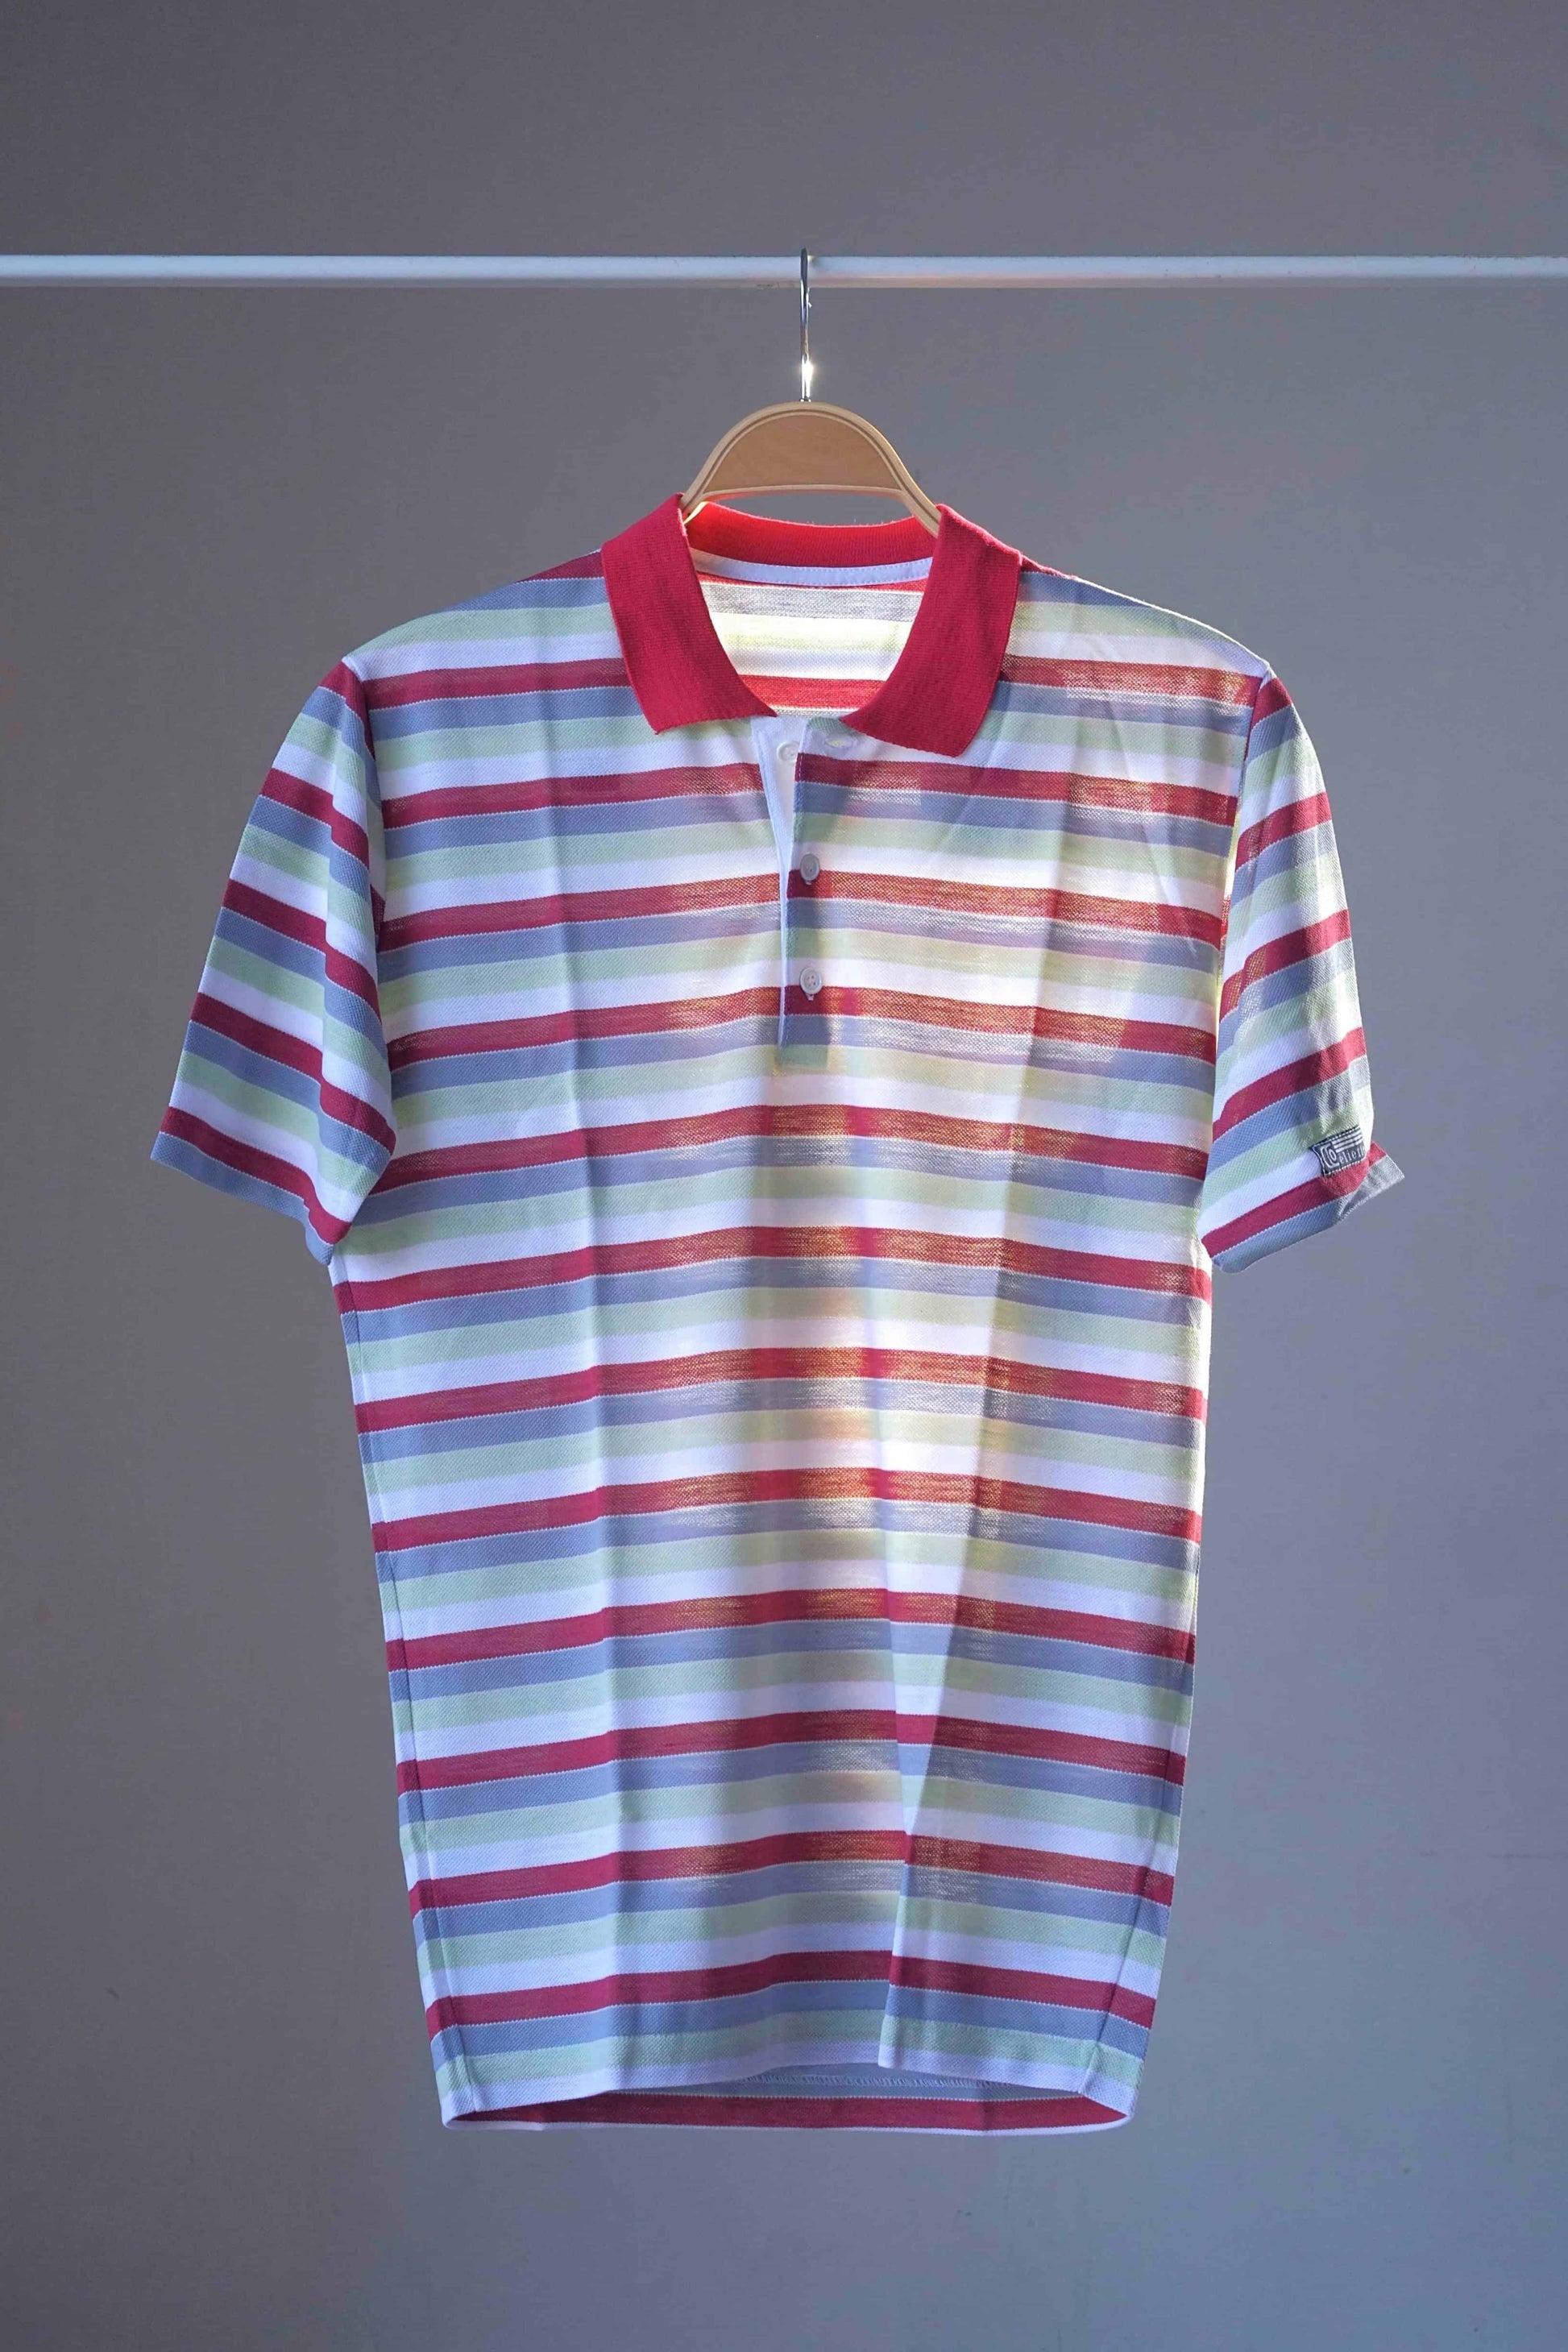 Vintage Early 80's Tennis Polo red grey